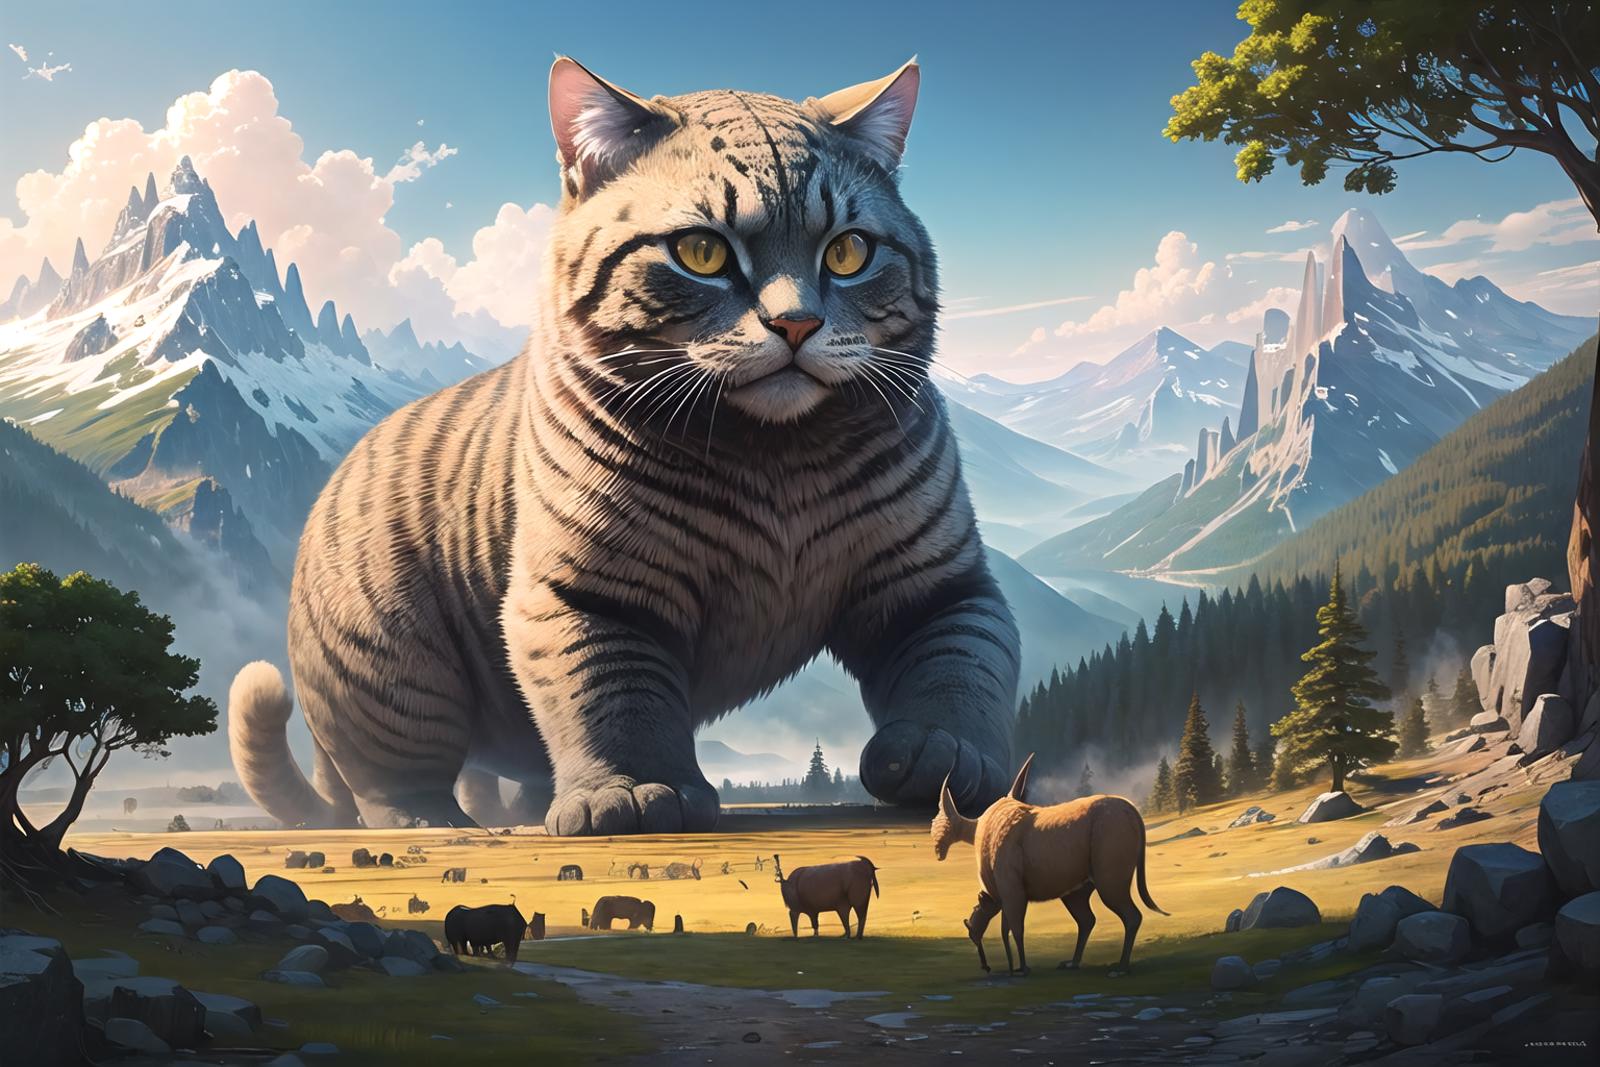 A Giant Tiger Cat Standing Over a Herd of Animals in a Mountainous Landscape